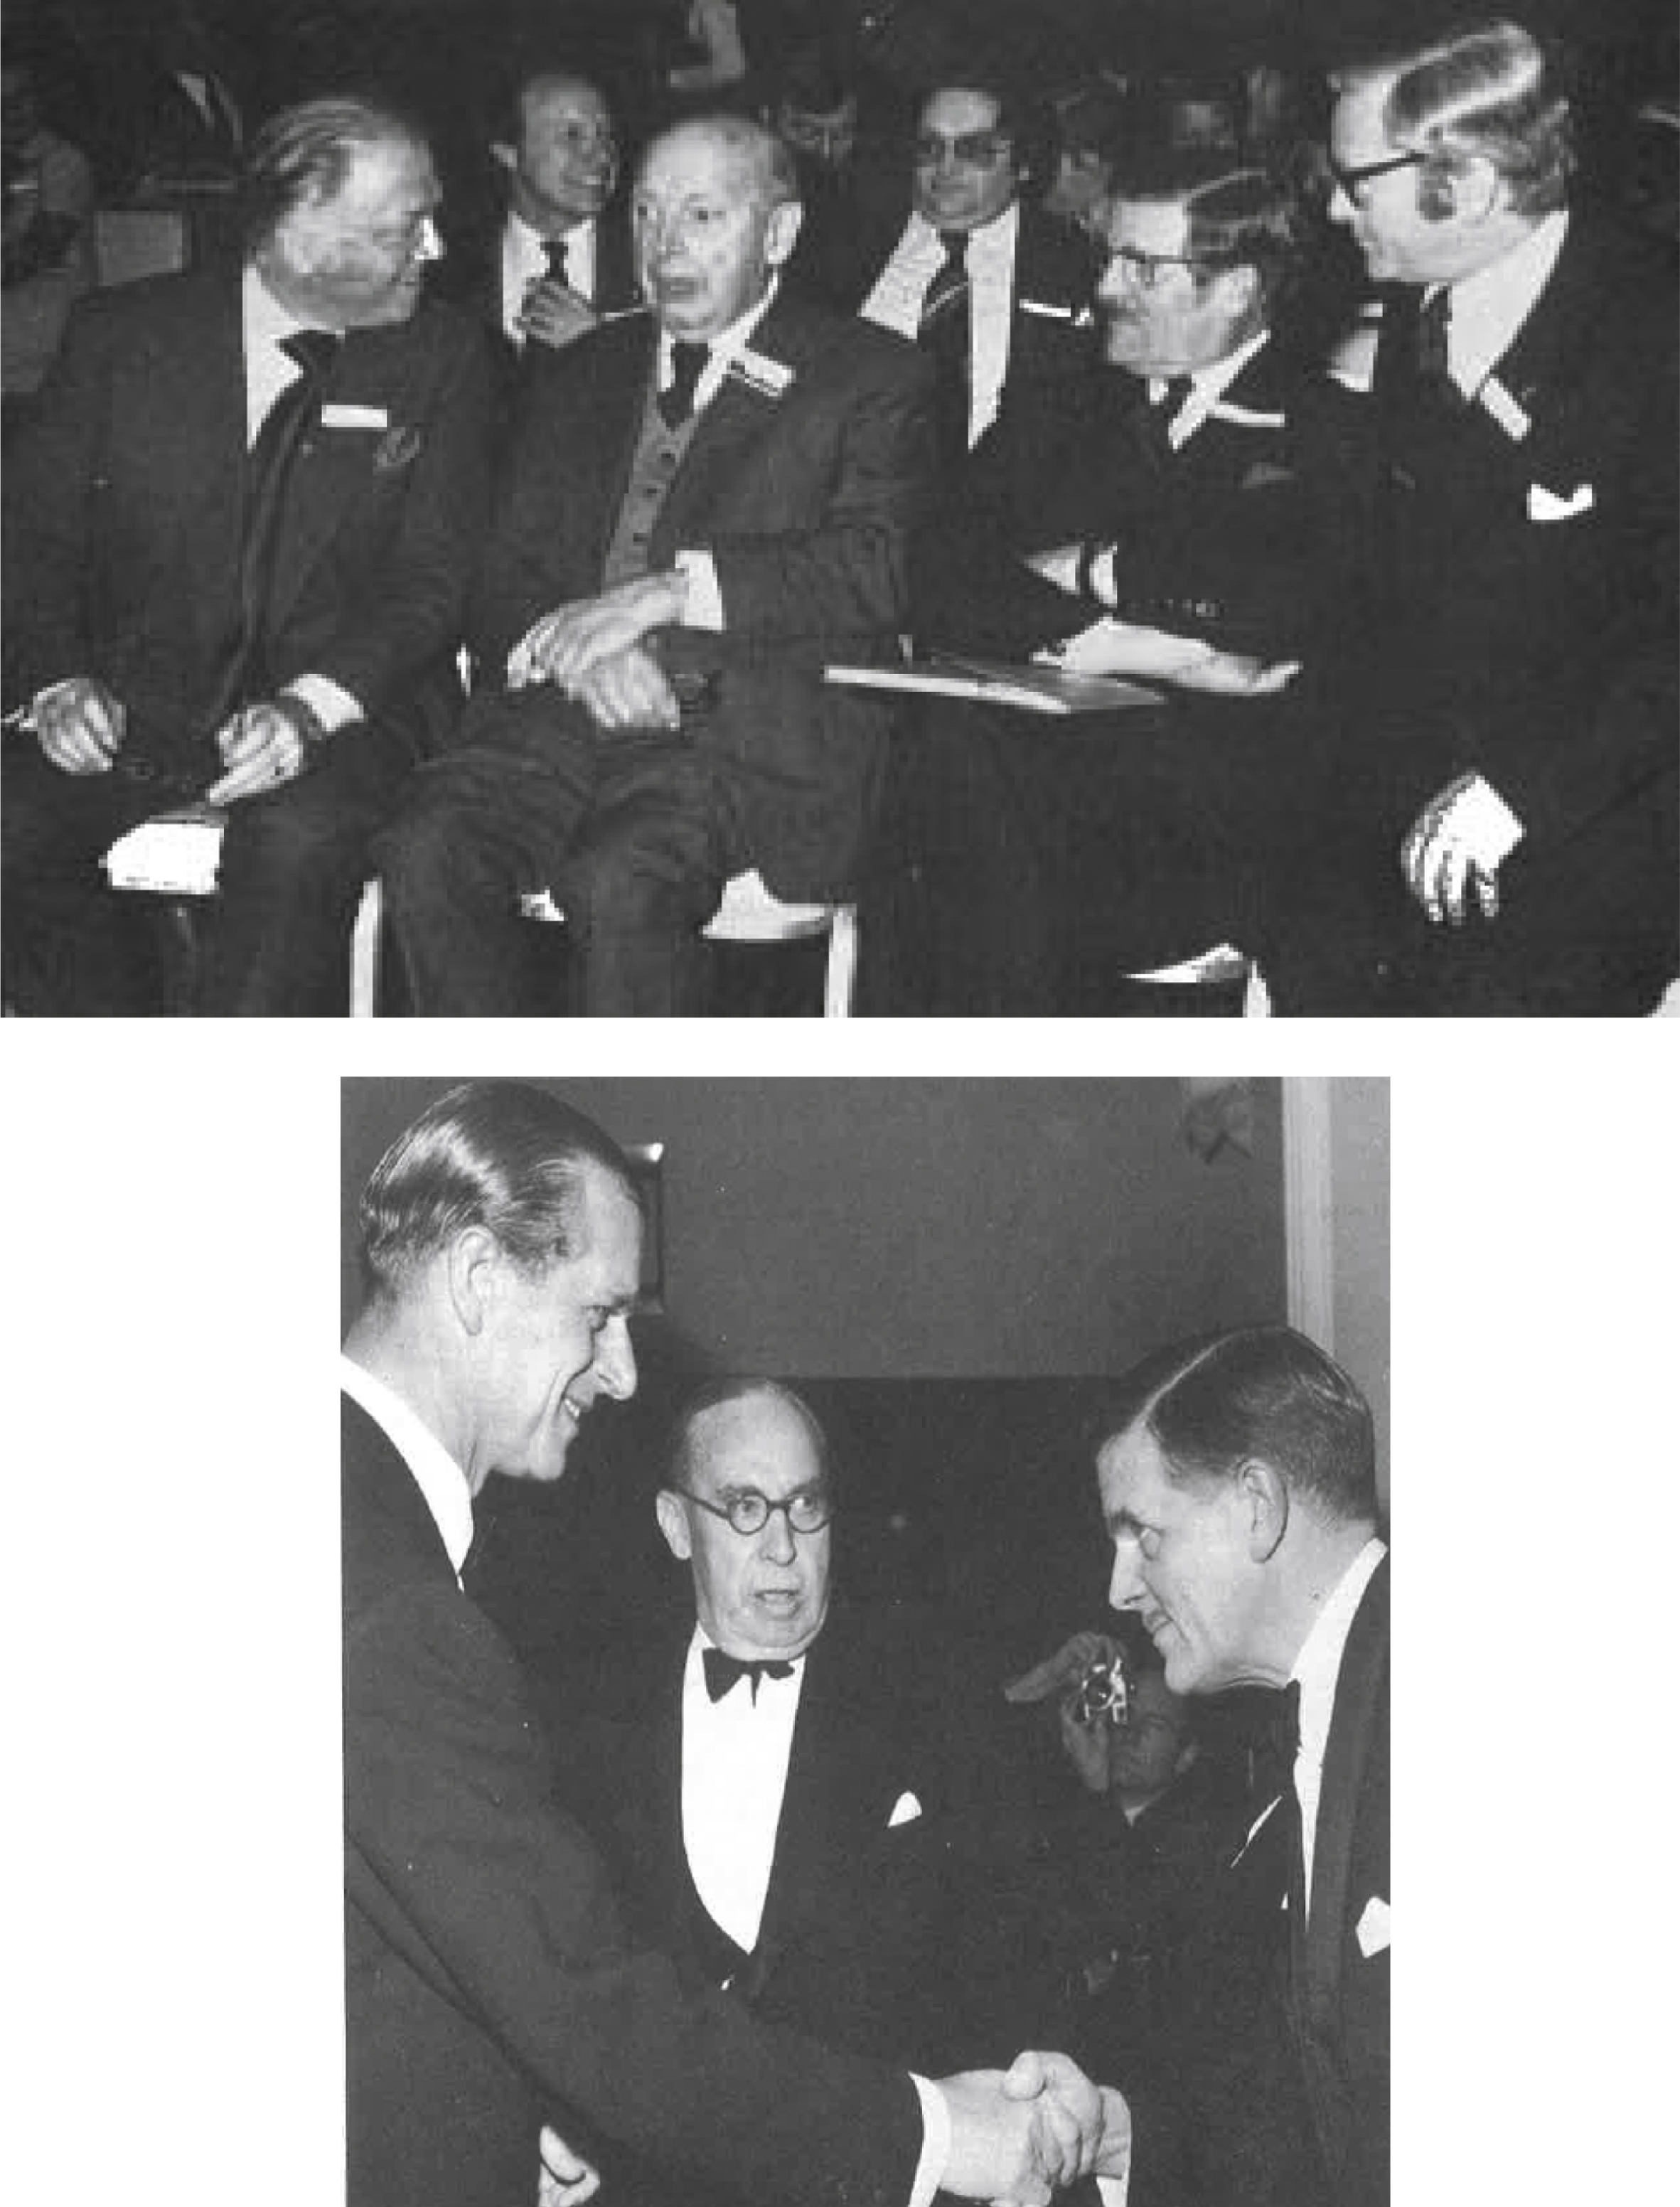 (upper panel, from left): Richard Attenborough (later Lord Attenborough of Richmond upon Thames), Professor F.J. Nattrass (former Professor of Medicine at University of Newcastle), John Walton and Paul Walker (Executive Director of the Muscular Dystrophy Group as Muscular Dystrophy UK was then known). (lower panel, from left): His Royal Highness Prince Philip, Duke of Edinburgh, Lord Heyworth, who for a brief period was Chairman of the Muscular Dystrophy Group, and John Walton..